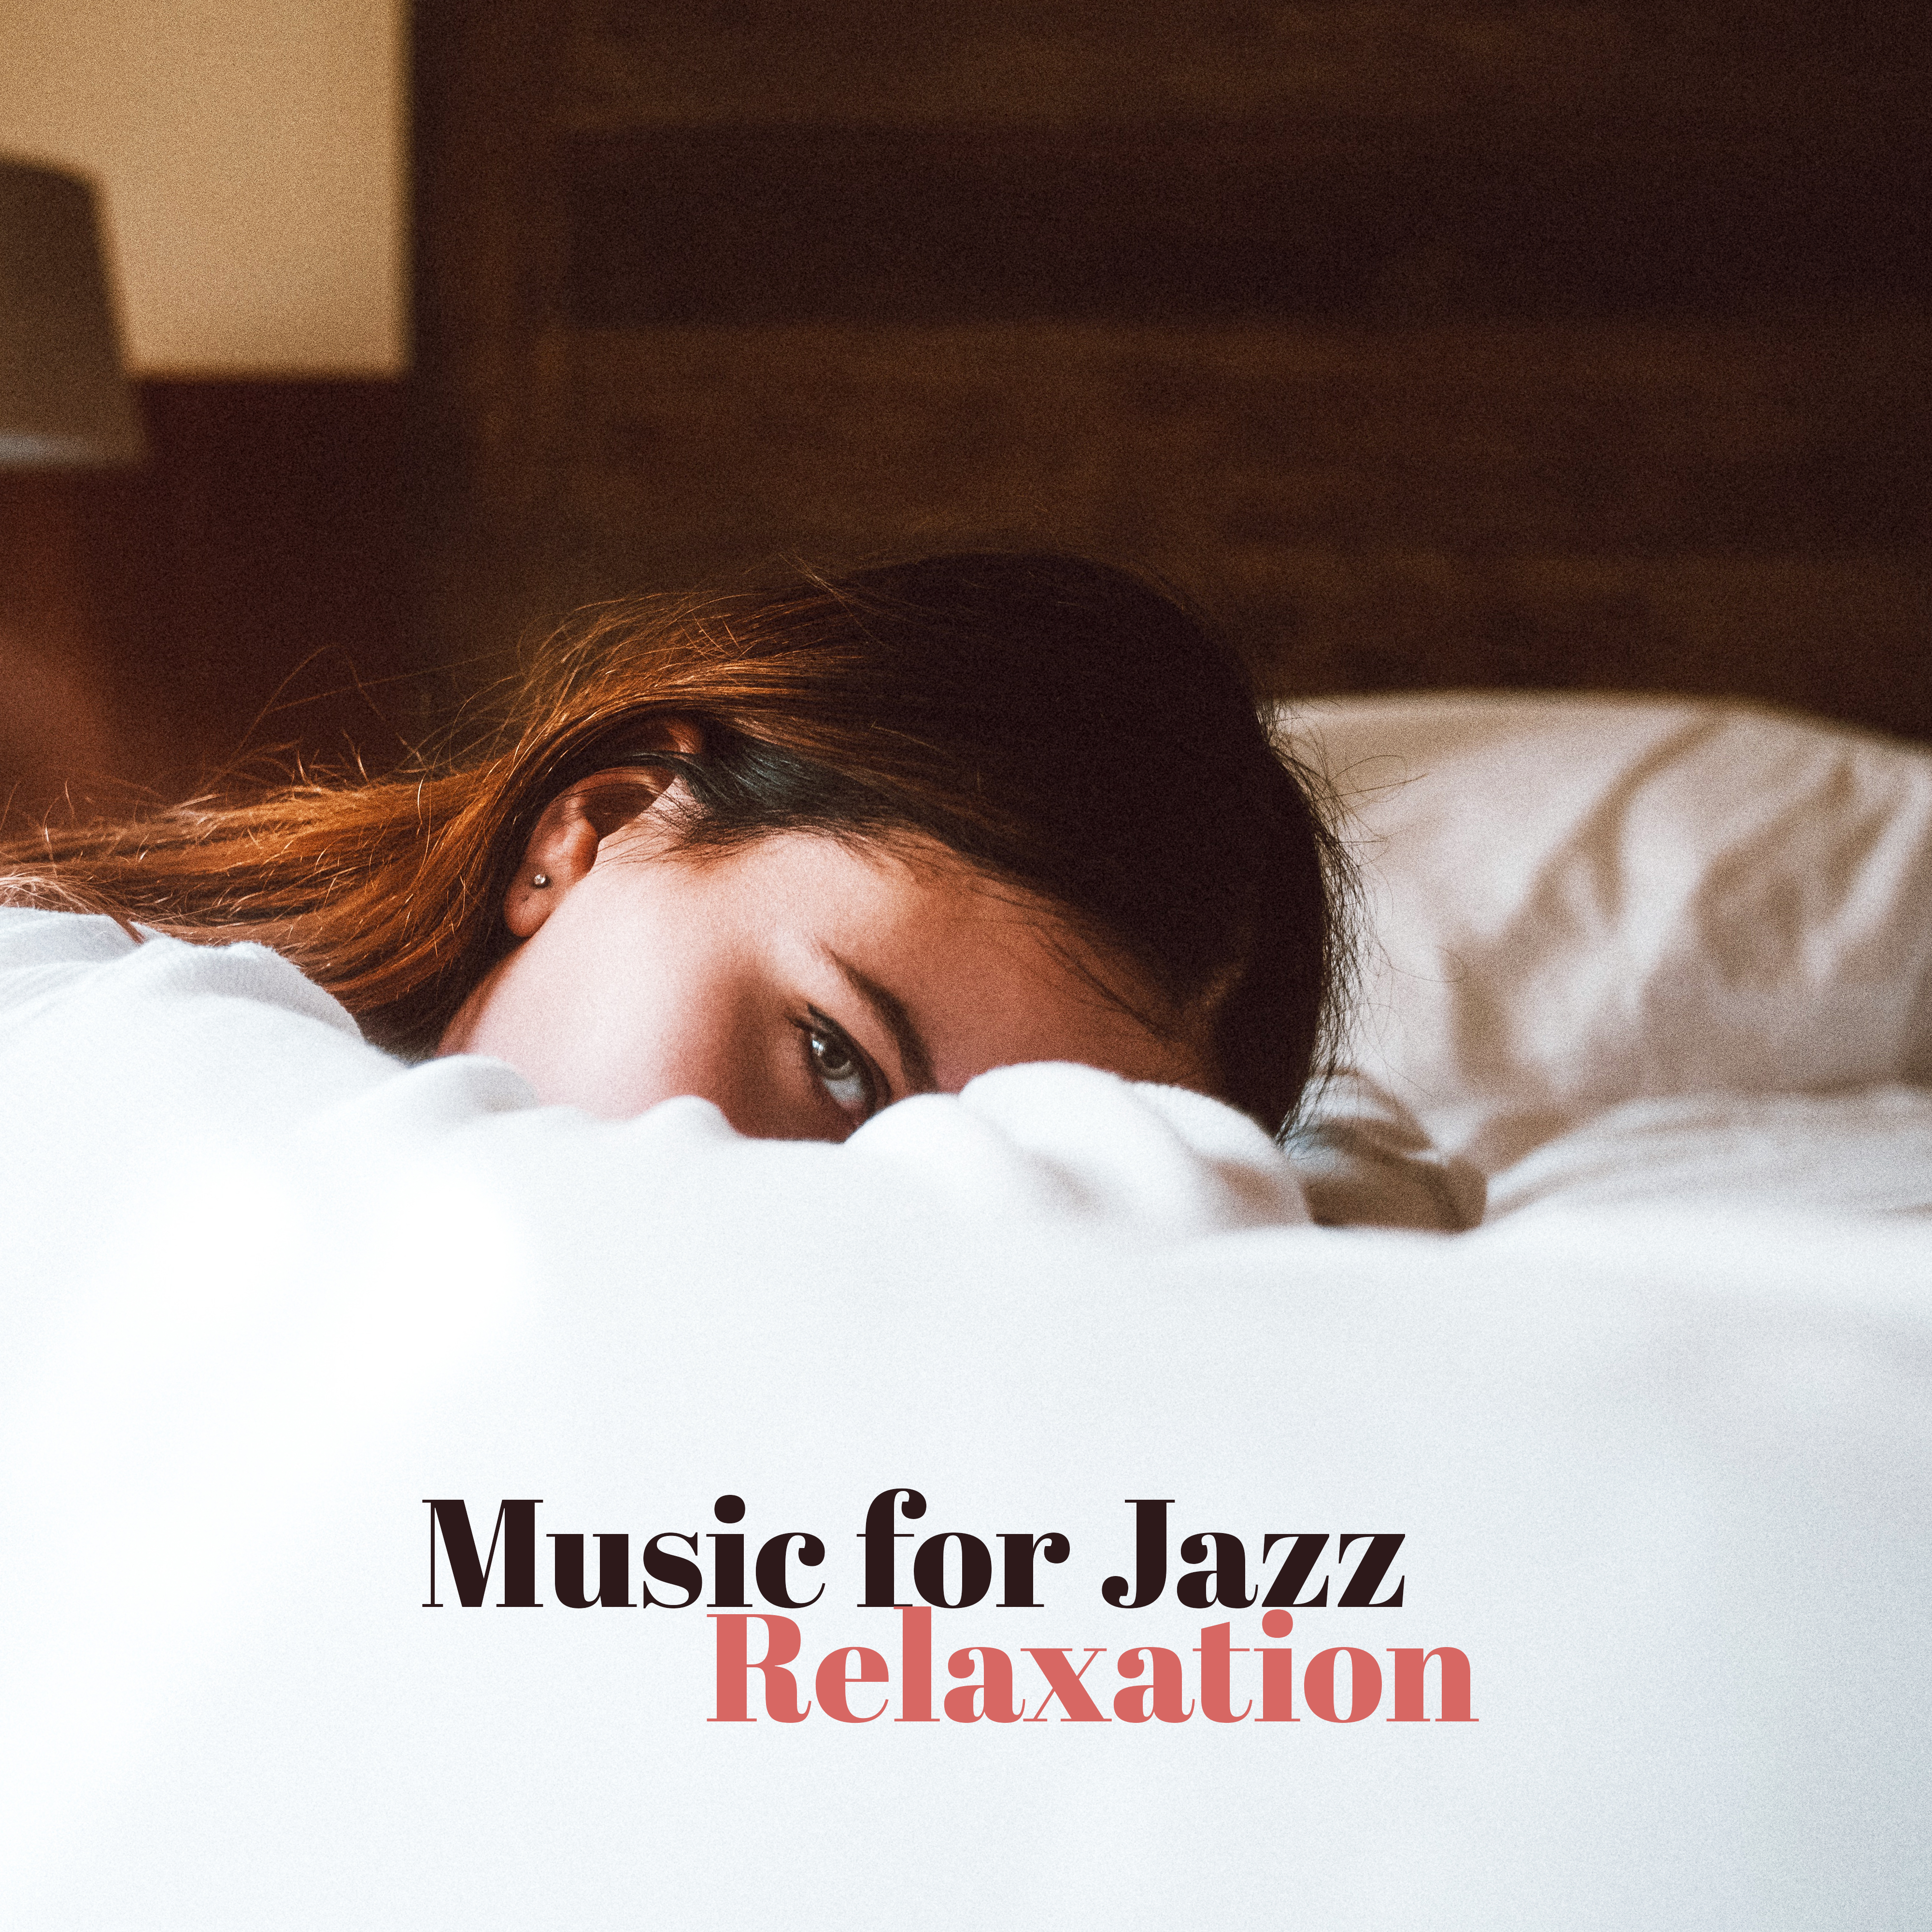 Music for Jazz Relaxation